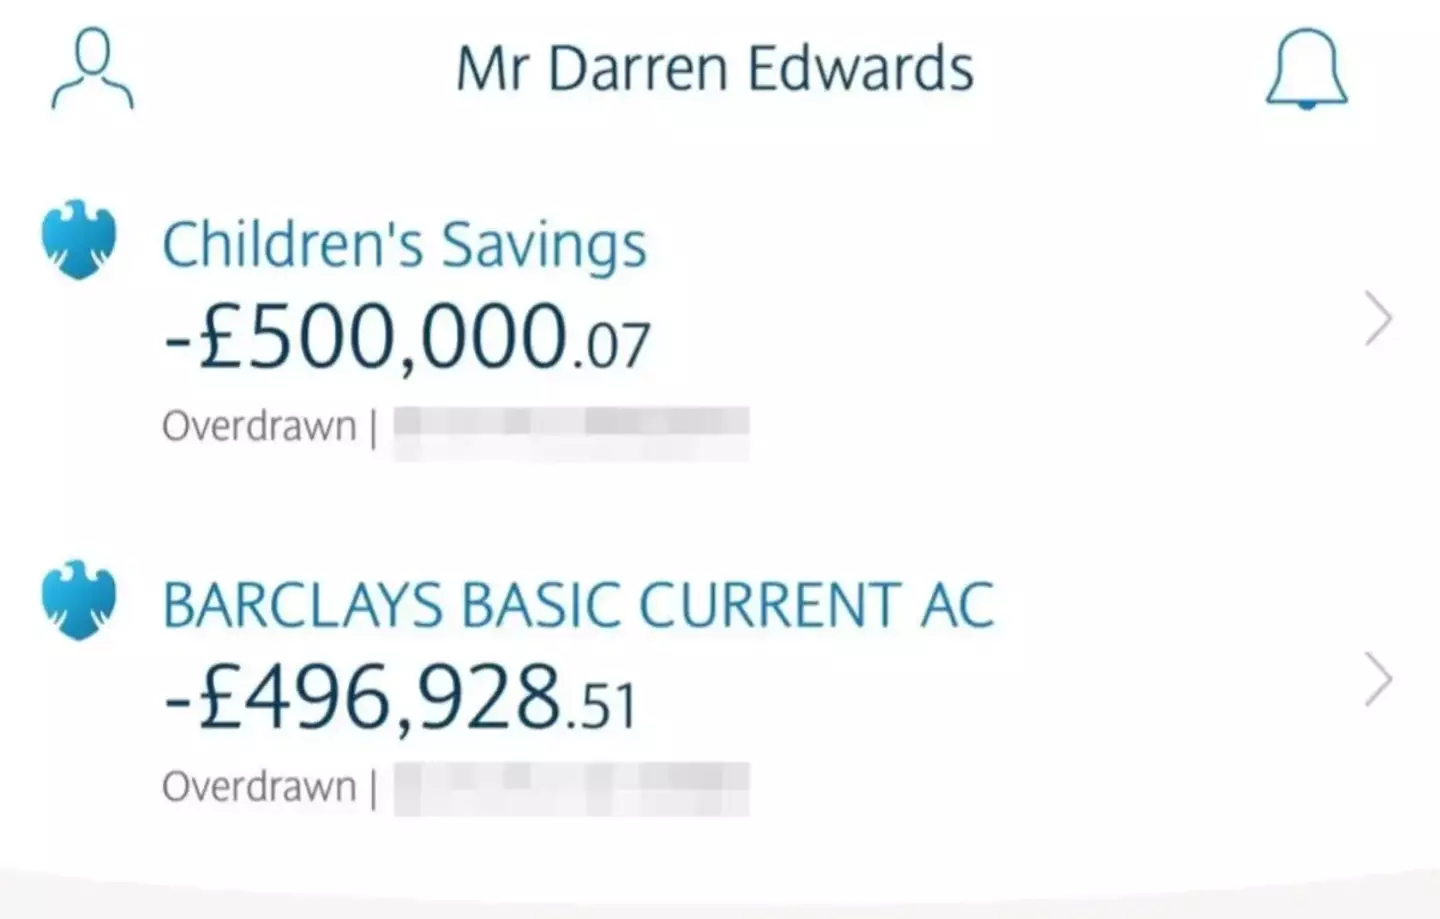 "Barclays hasn’t contacted me once."